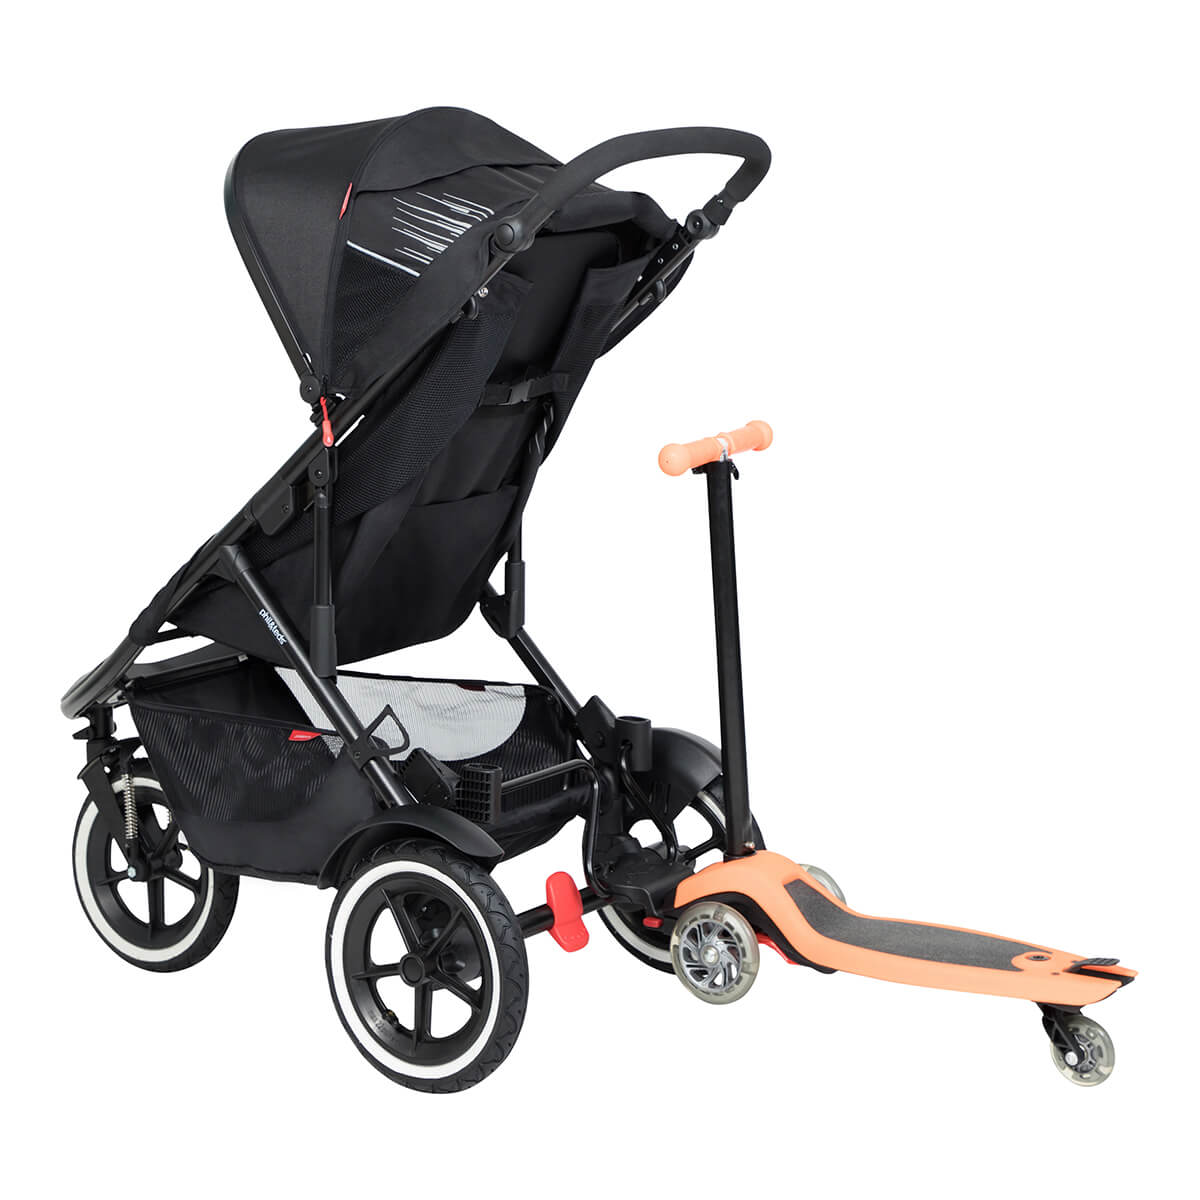 https://cdn.accentuate.io/8582363054419/19272668348504/philteds-sport-poussette-with-freerider-stroller-board-in-rear-v1700698190745.jpg?1200x1200